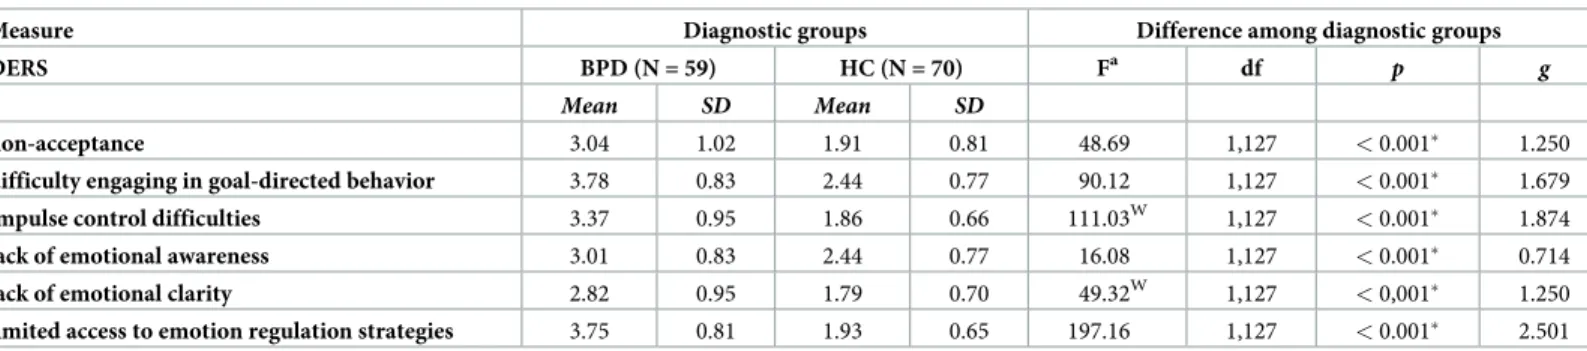 Table 4. Group comparisons for the BPD and HC groups on the subscale scores of the difficulties of emotion regulation scale, and effect sizes measured by Hedge’s g formula.